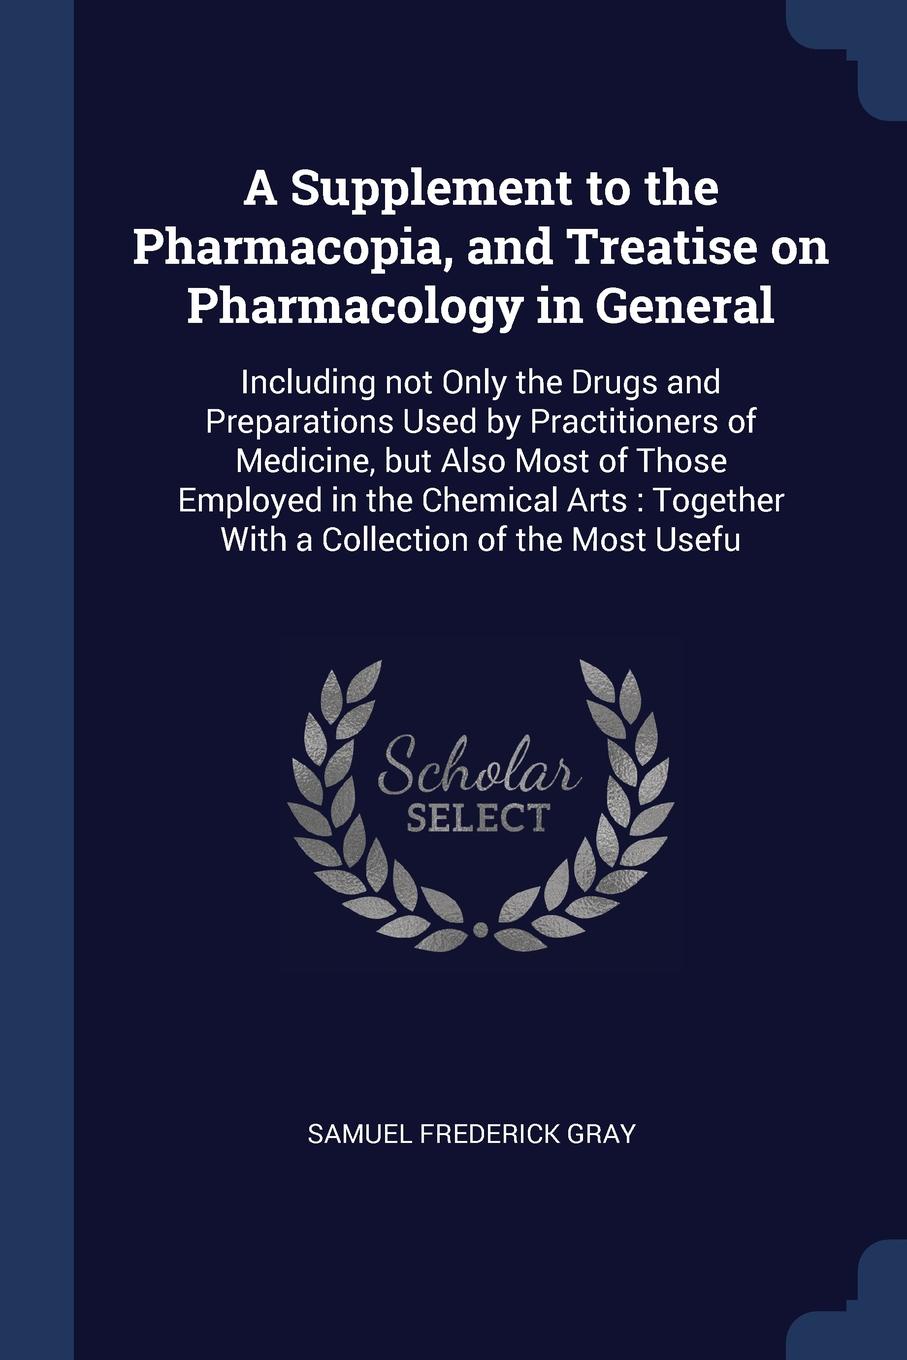 A Supplement to the Pharmacopia, and Treatise on Pharmacology in General. Including not Only the Drugs and Preparations Used by Practitioners of Medicine, but Also Most of Those Employed in the Chemical Arts : Together With a Collection of the Mos...